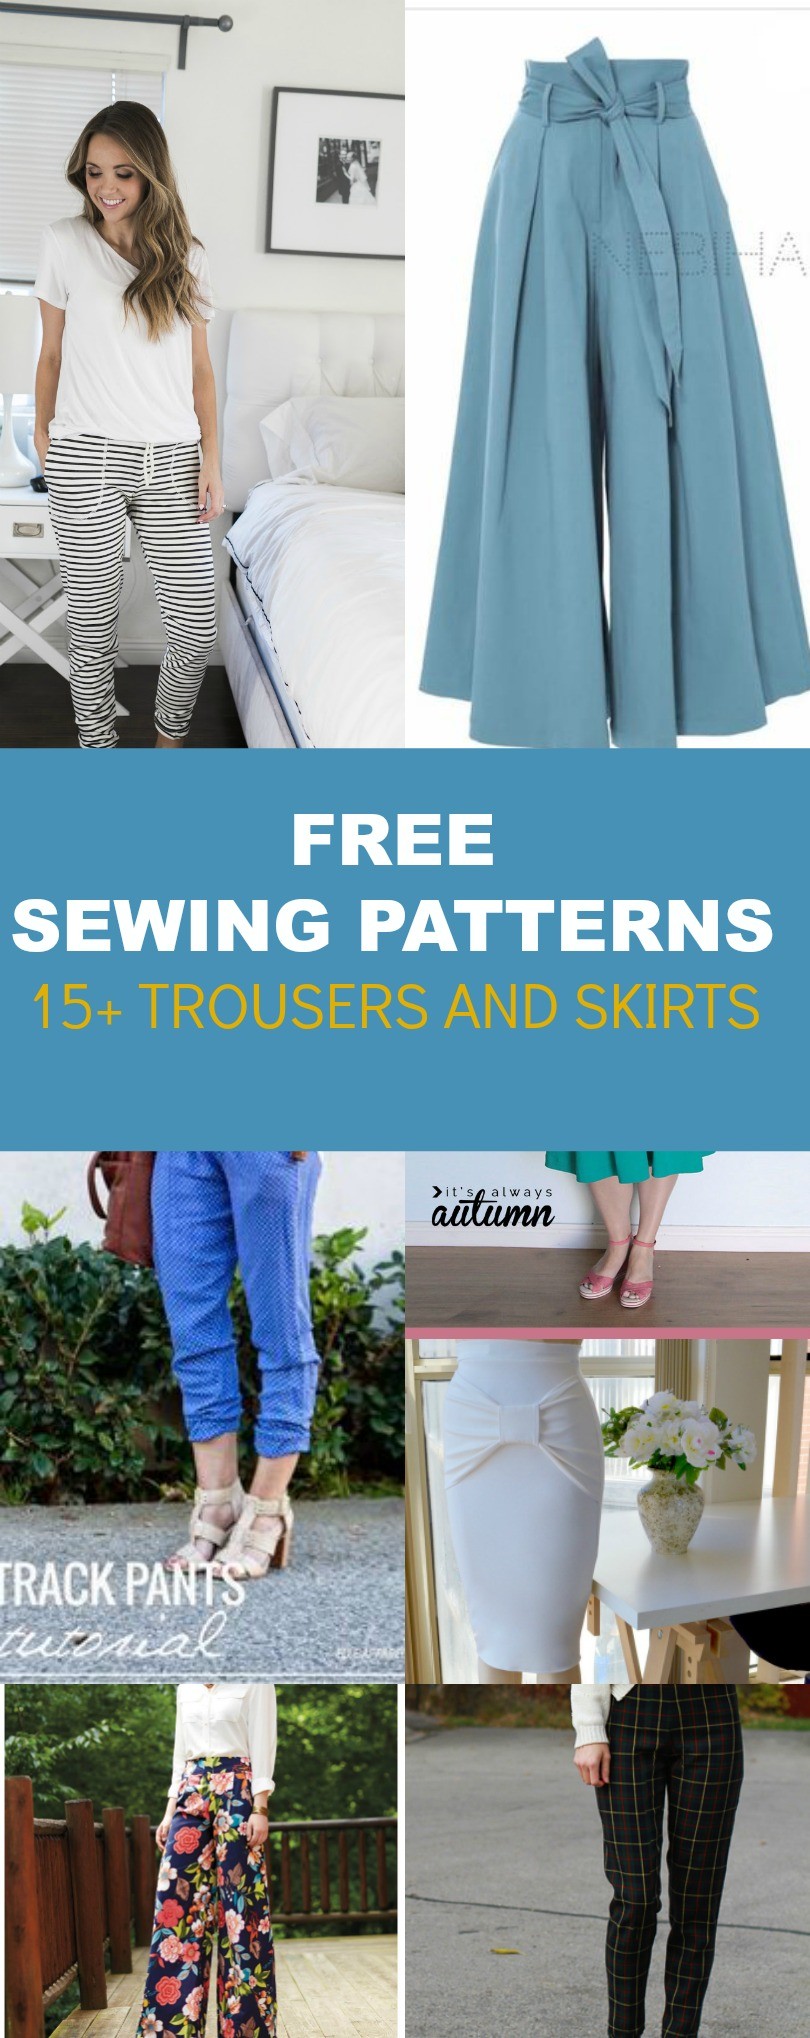 14+ Free baby pants sewing patterns - Swoodson Says